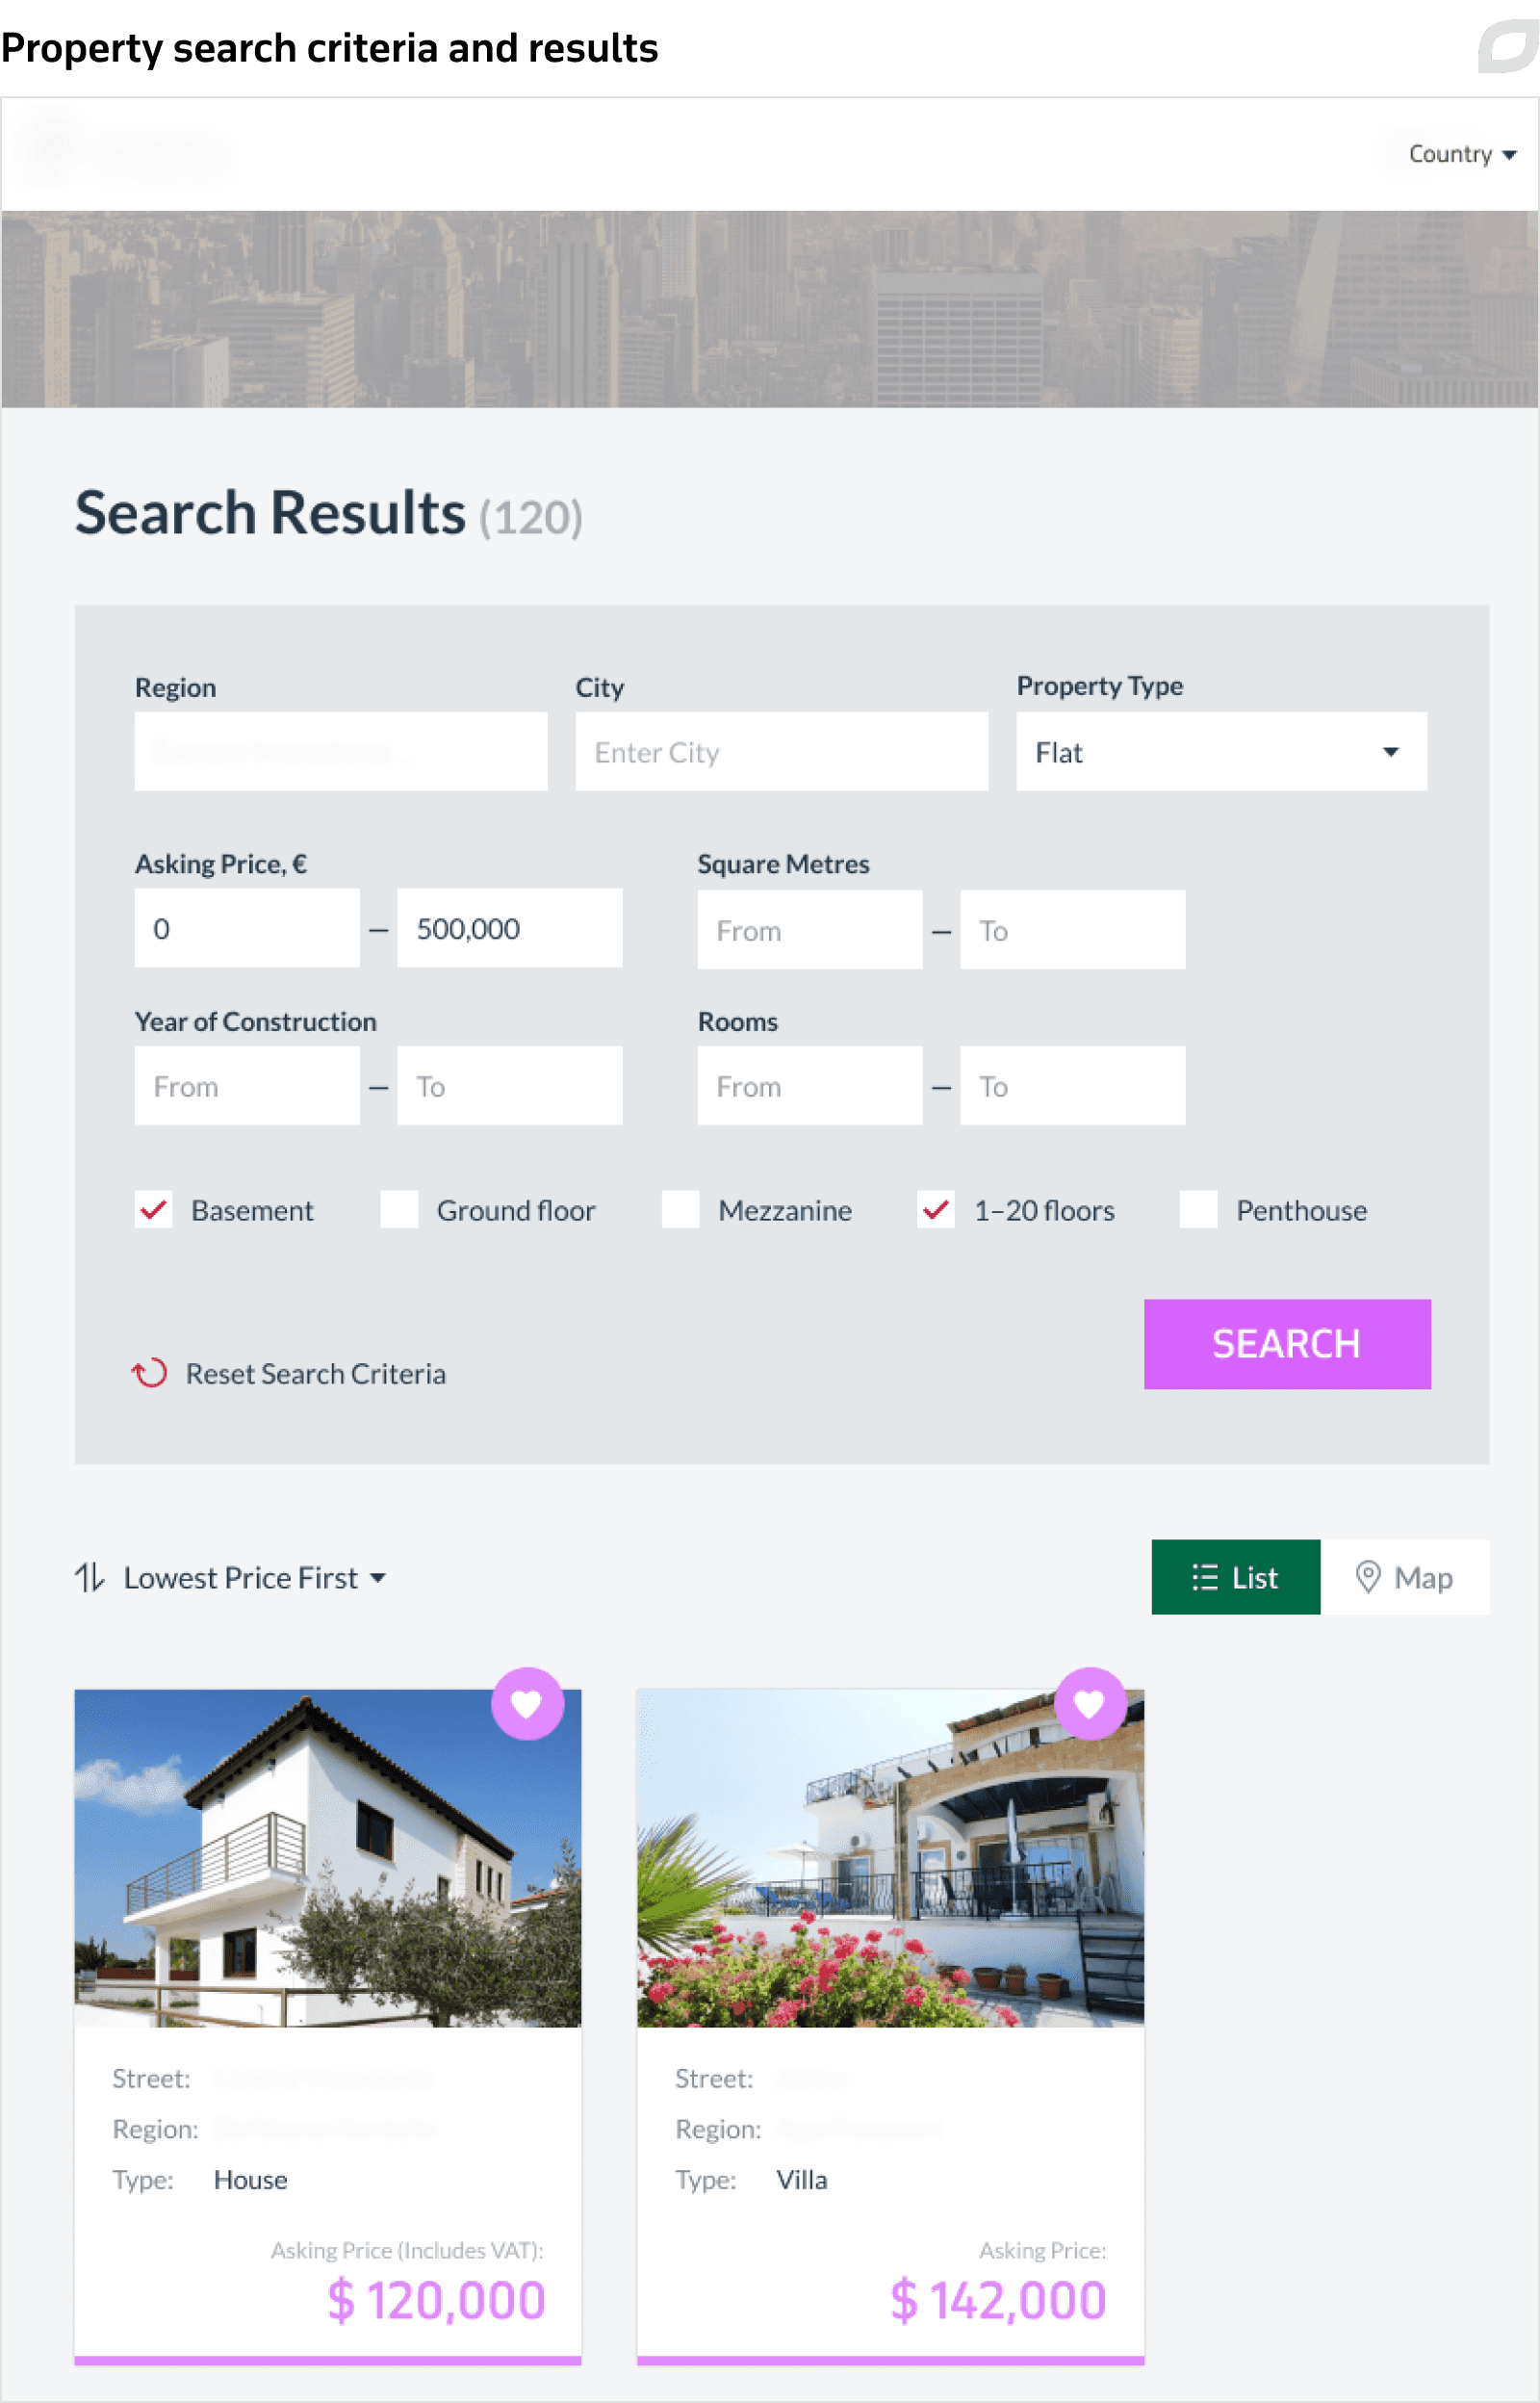 Property search criteria and results